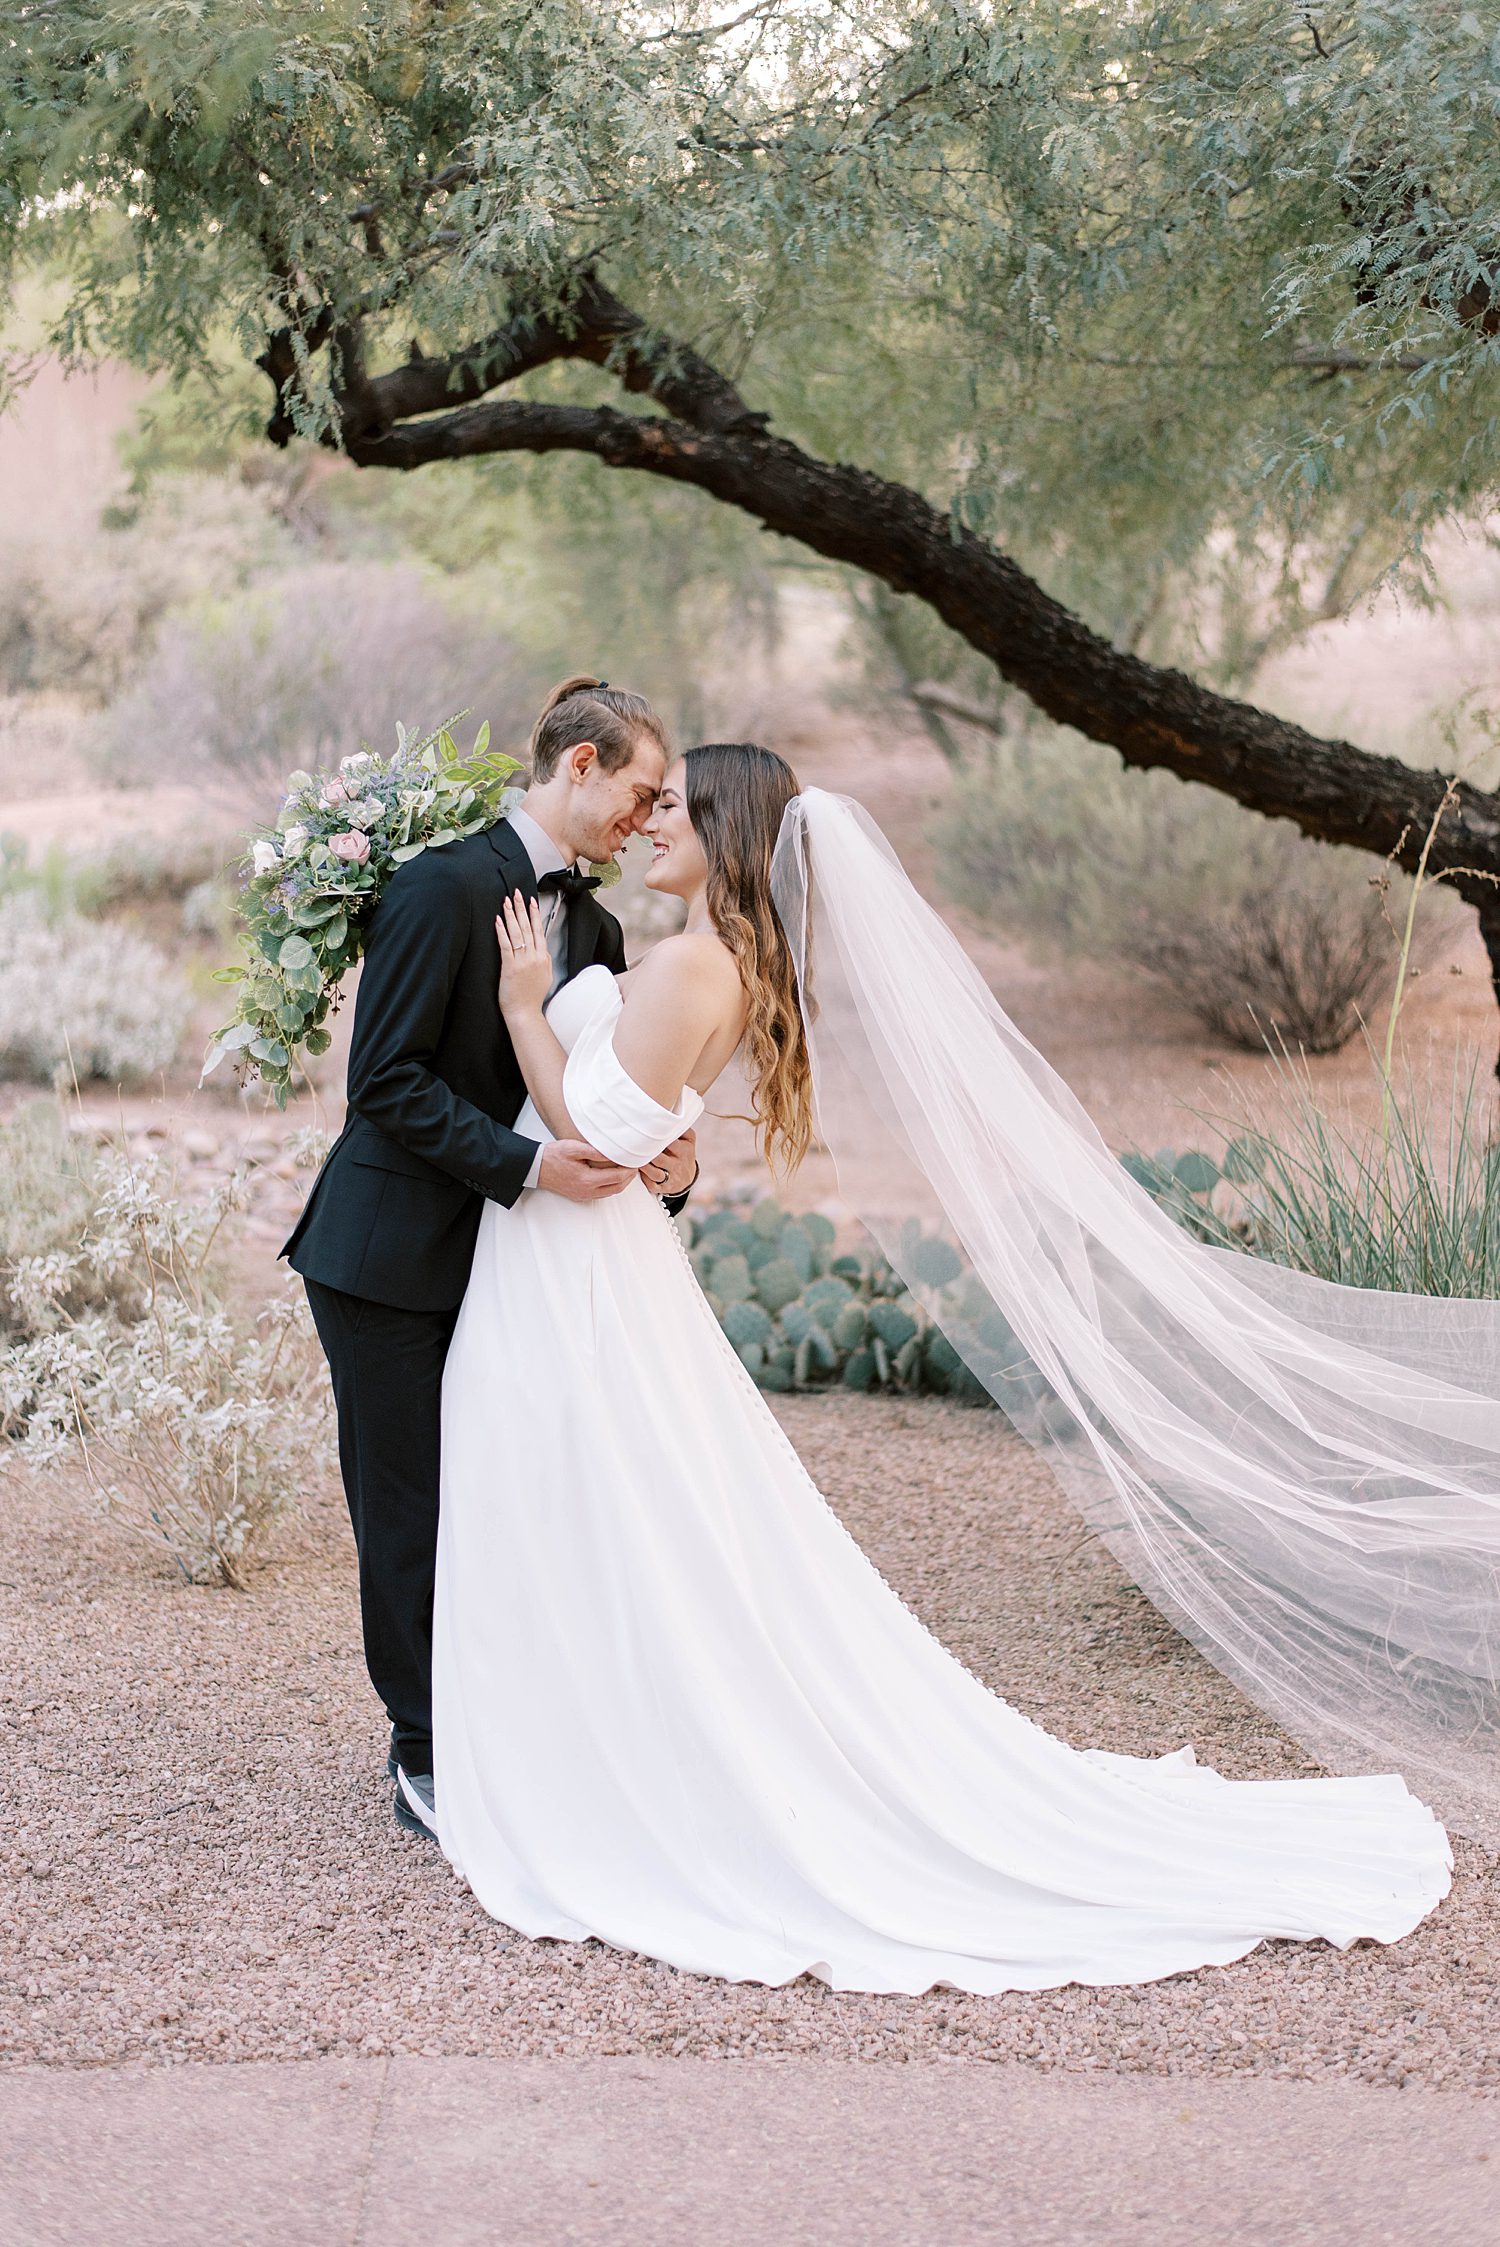 newlyweds kiss by tree in desert during destination wedding day